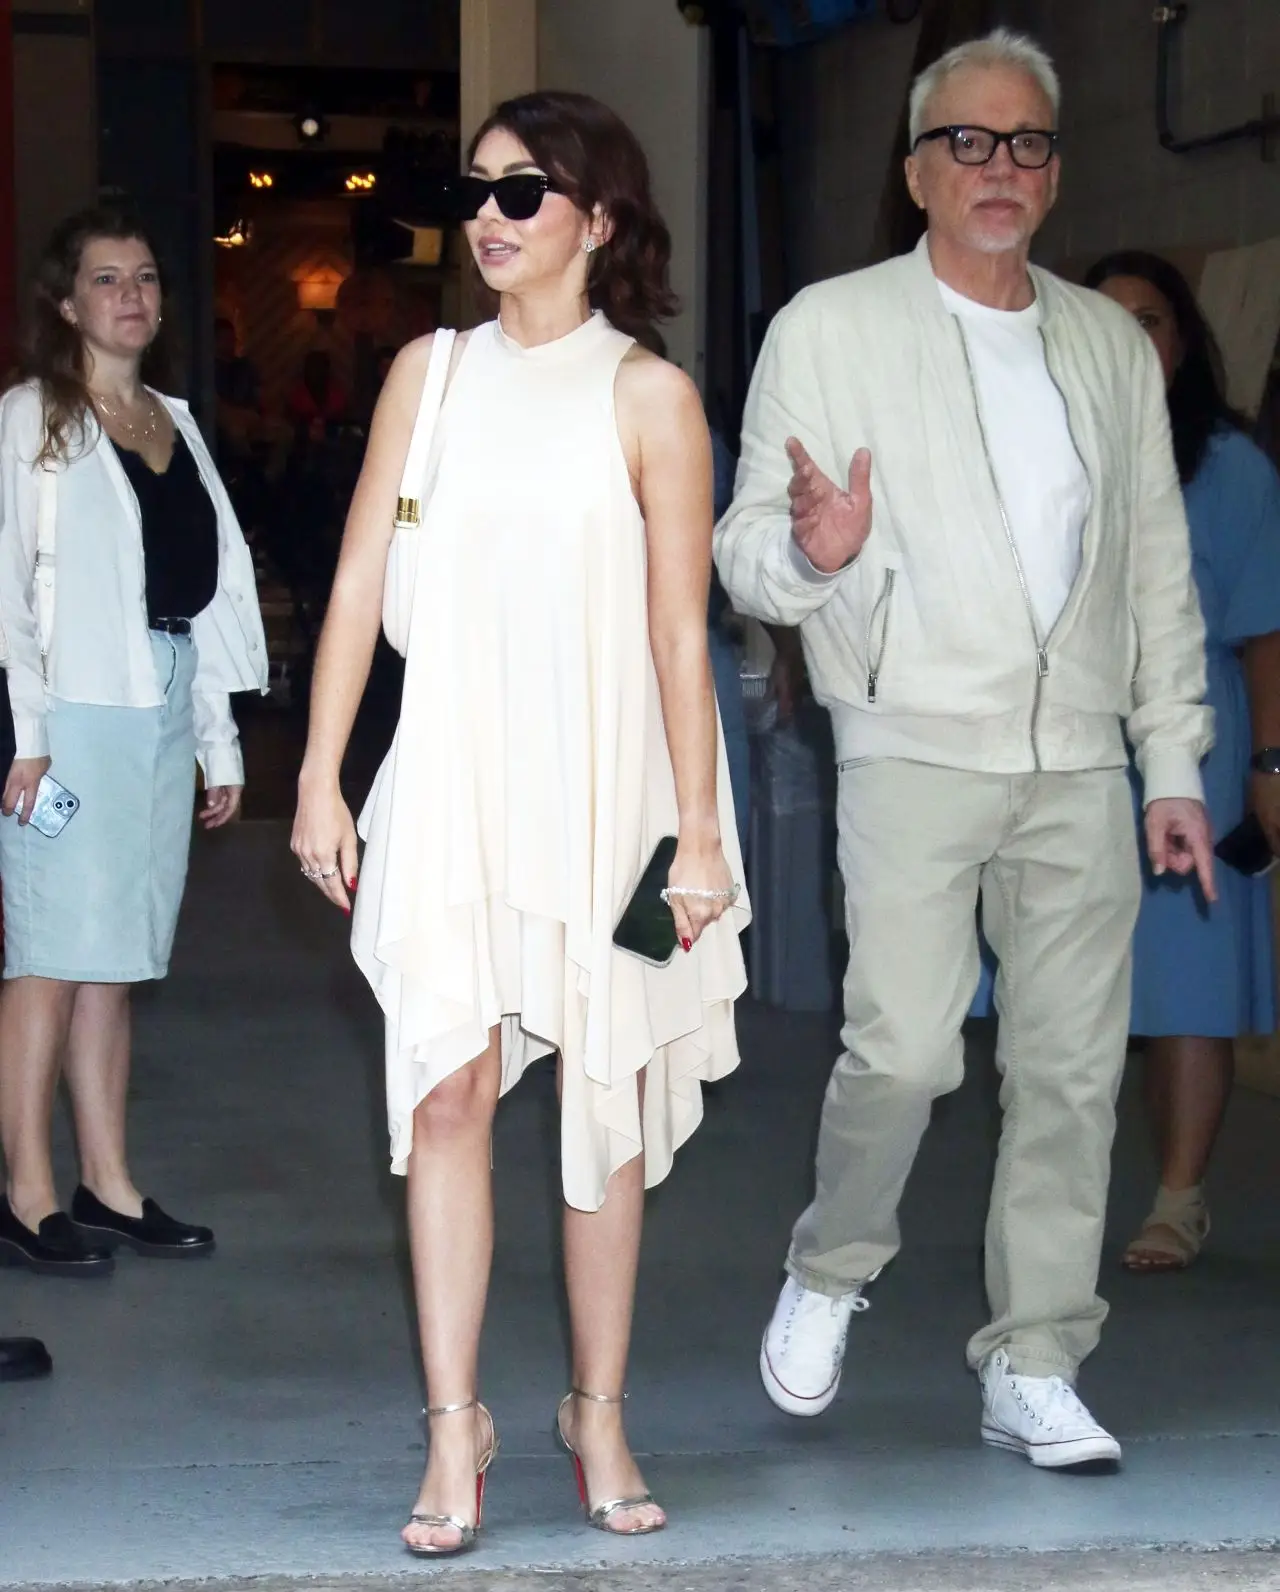 SARAH HYLAND IN A WHITE DRESS EXITS LIVE WITH KELLY AND MARK IN NEW YORK7